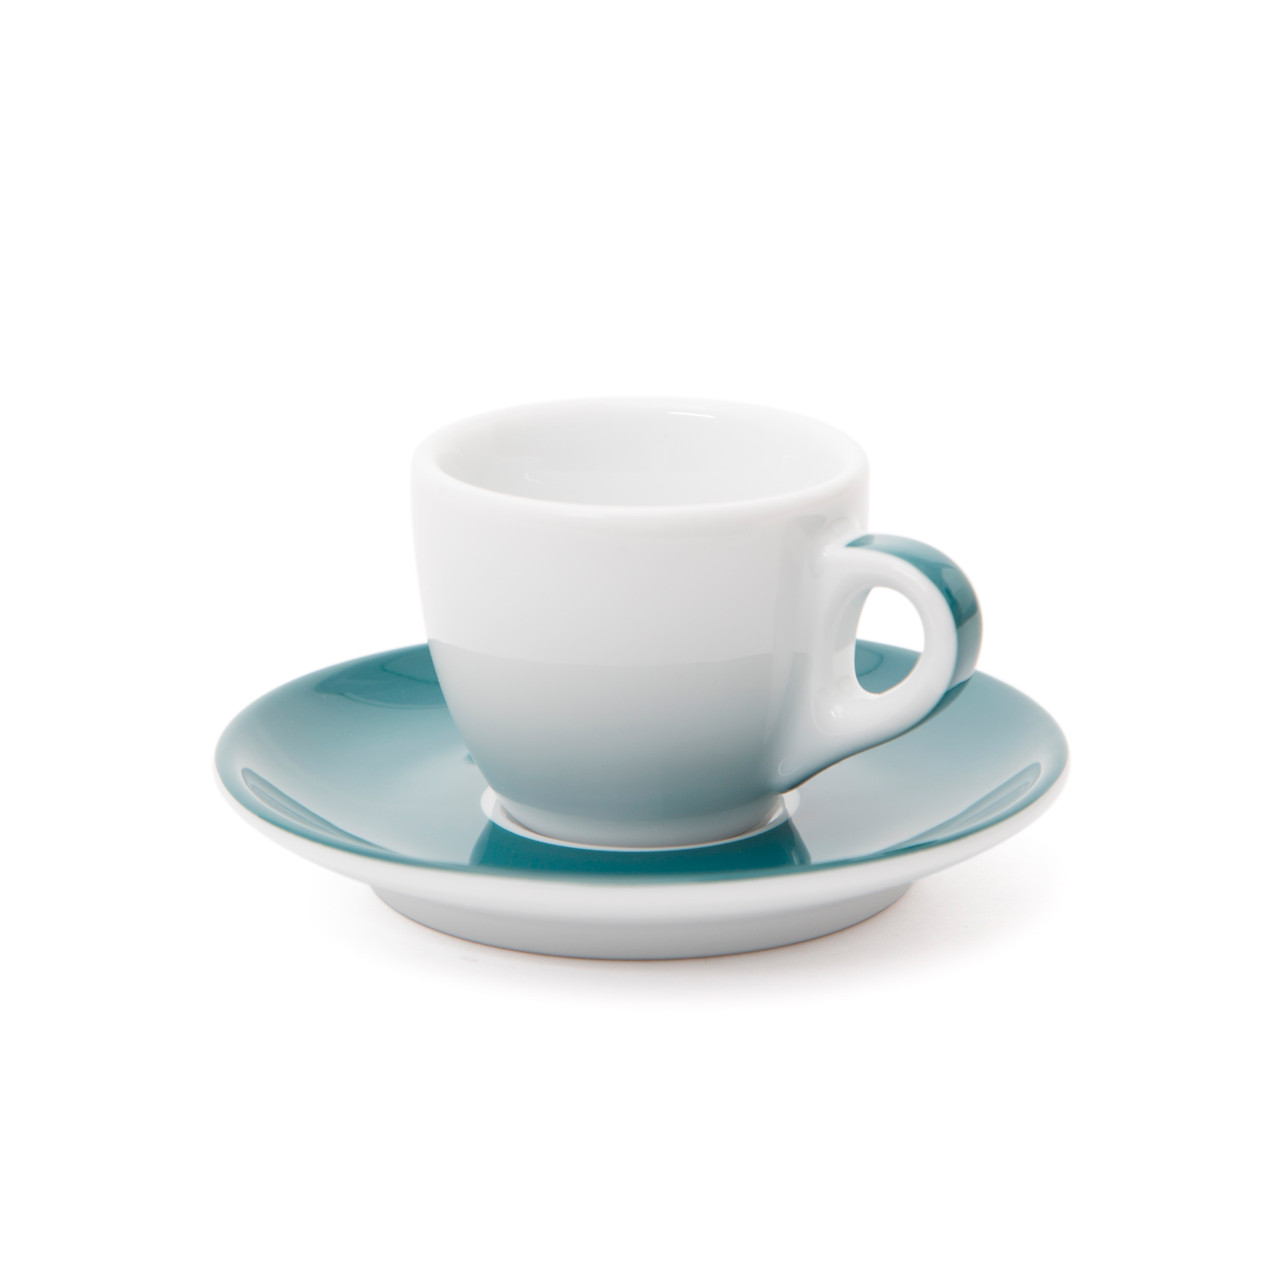 https://cdn11.bigcommerce.com/s-qnui5gocu2/images/stencil/1280x1280/products/249/1146/Front-33009-Teal-Striped-Verona-Espresso-Cup-and-Saucer-2.5oz__70312.1597157770.jpg?c=1